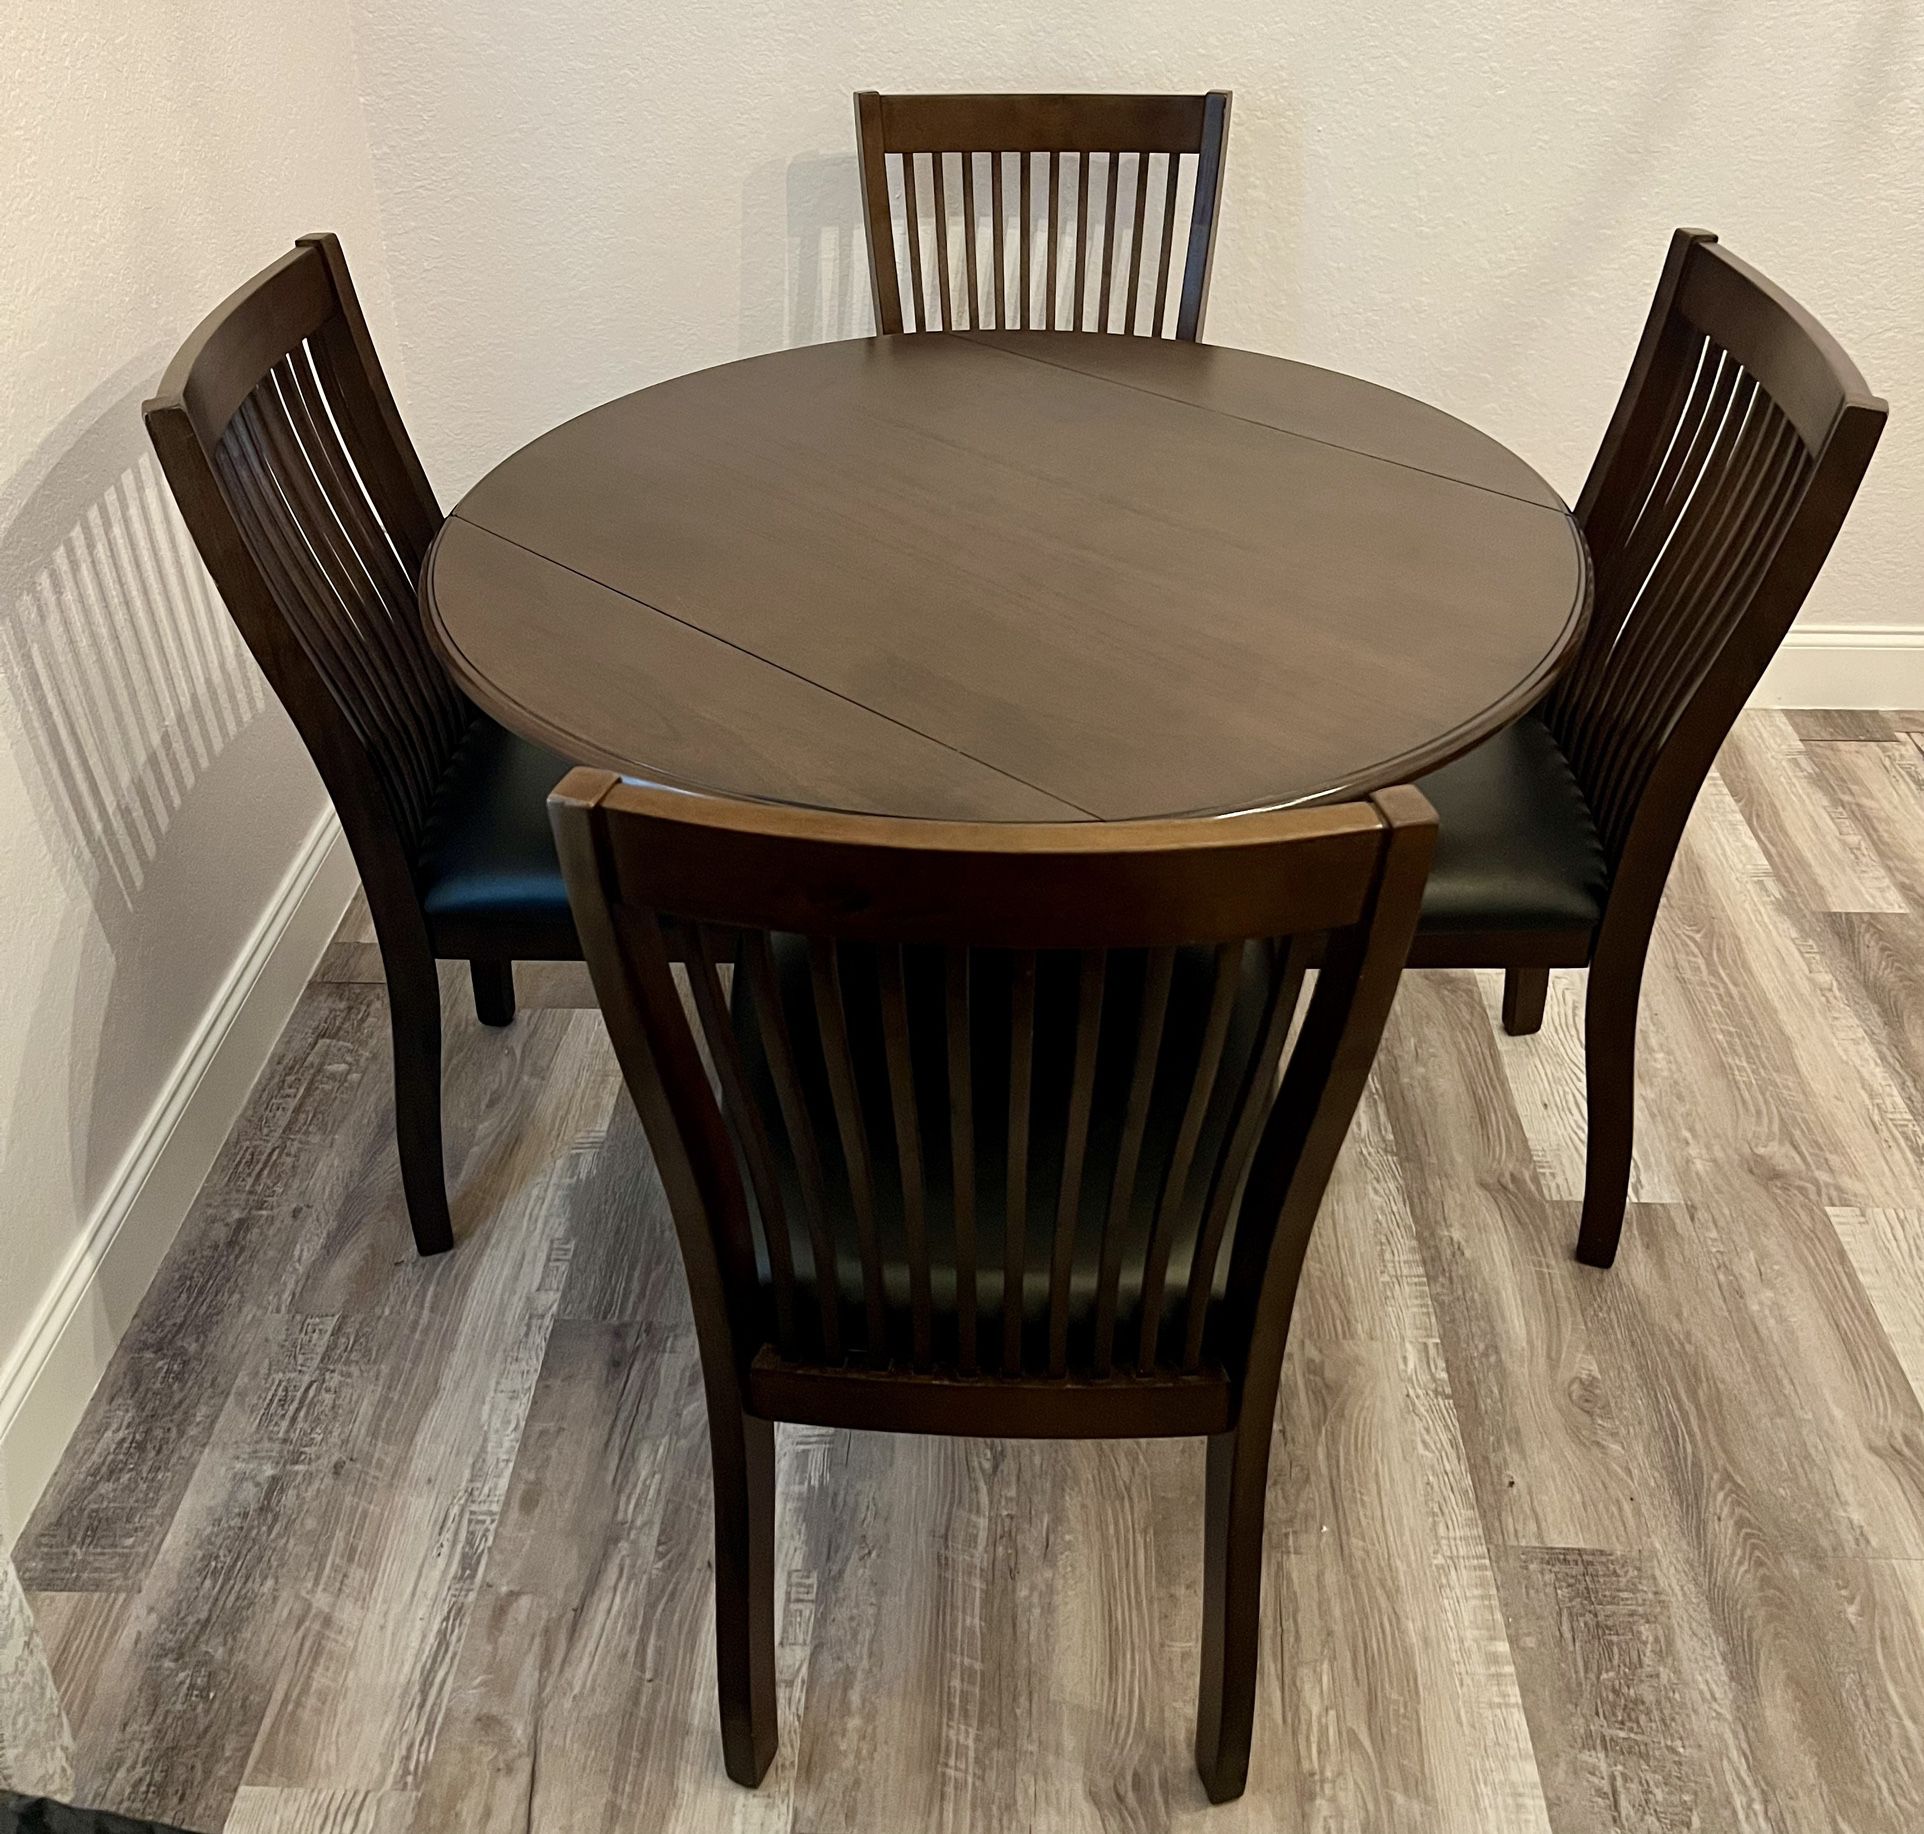 ASHLEY FURNITURE DINING SET / DINING TABLE $200 FIRM